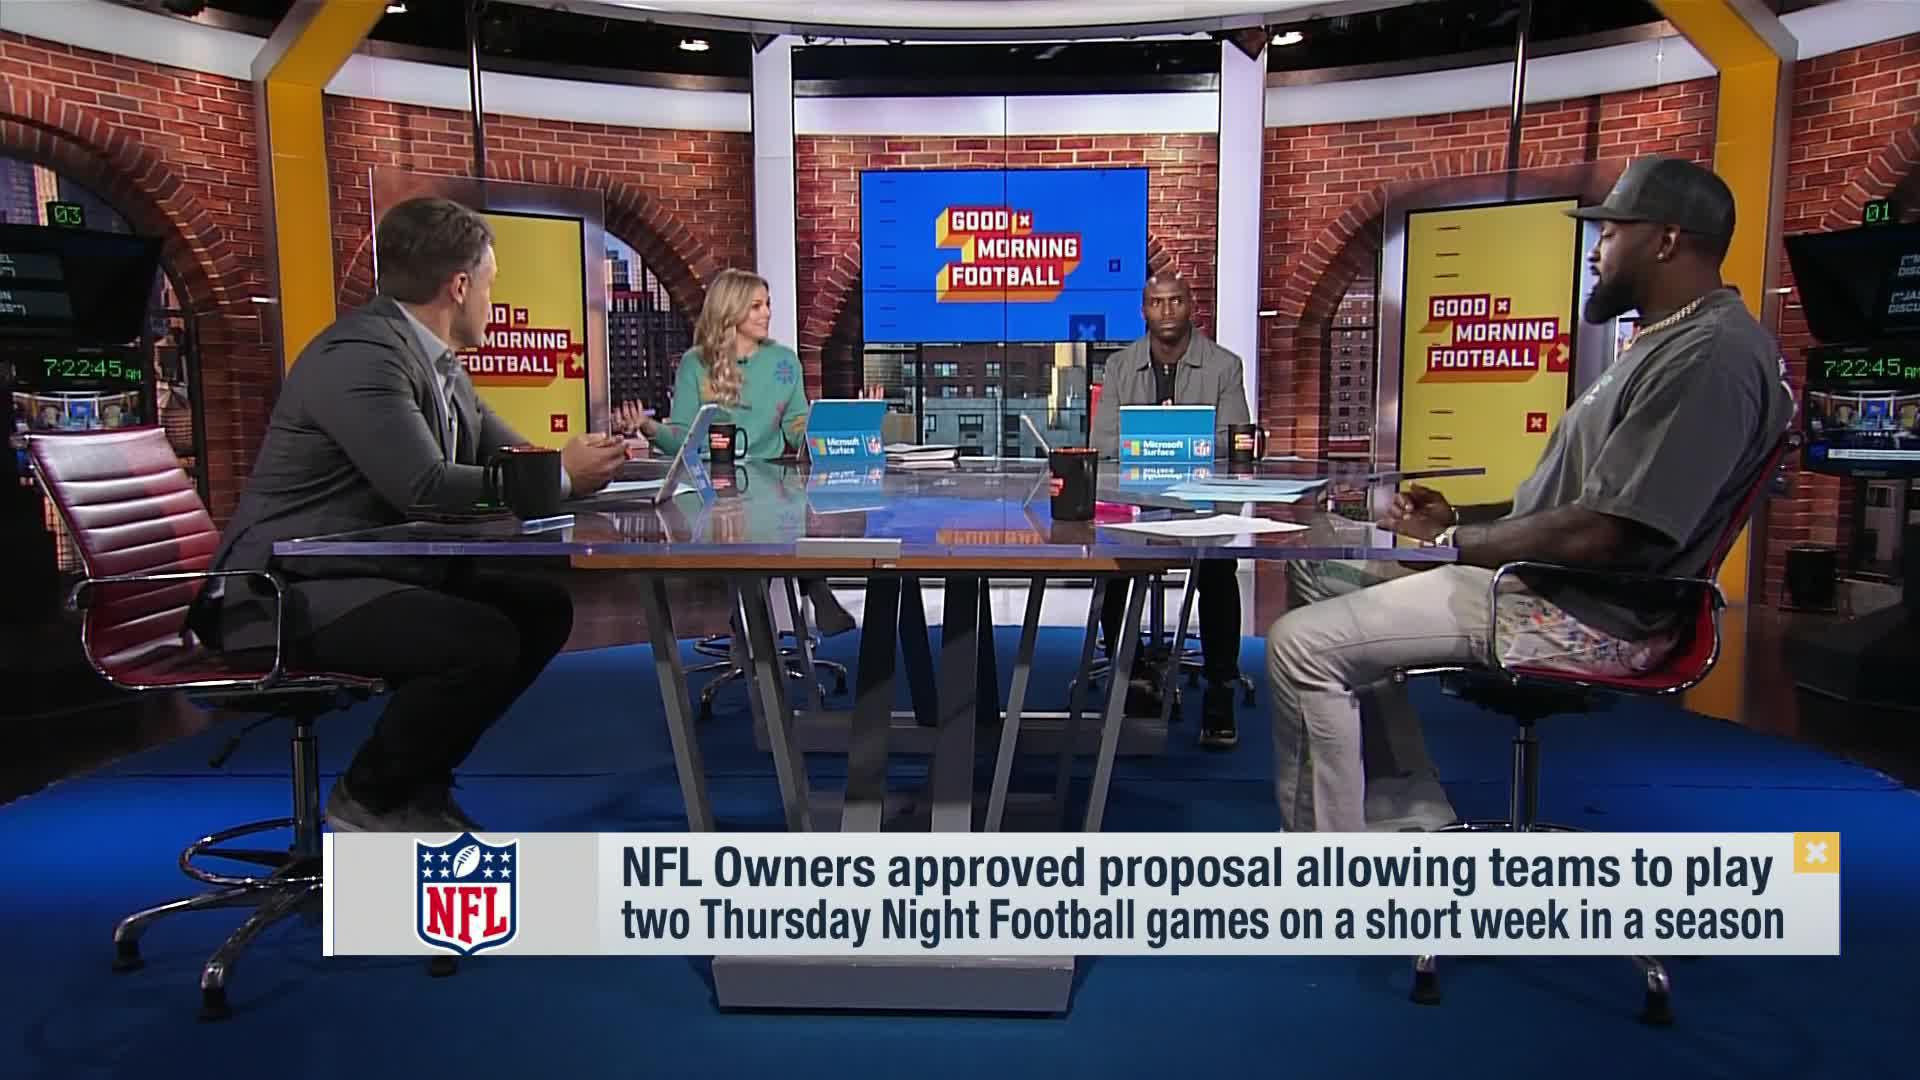 Good Morning Football on X: 'NFL owners approved a proposal allowing teams  to play two Thursday Night Football games on a short week in a season  @MichaelBrockers with a player's perspective  /